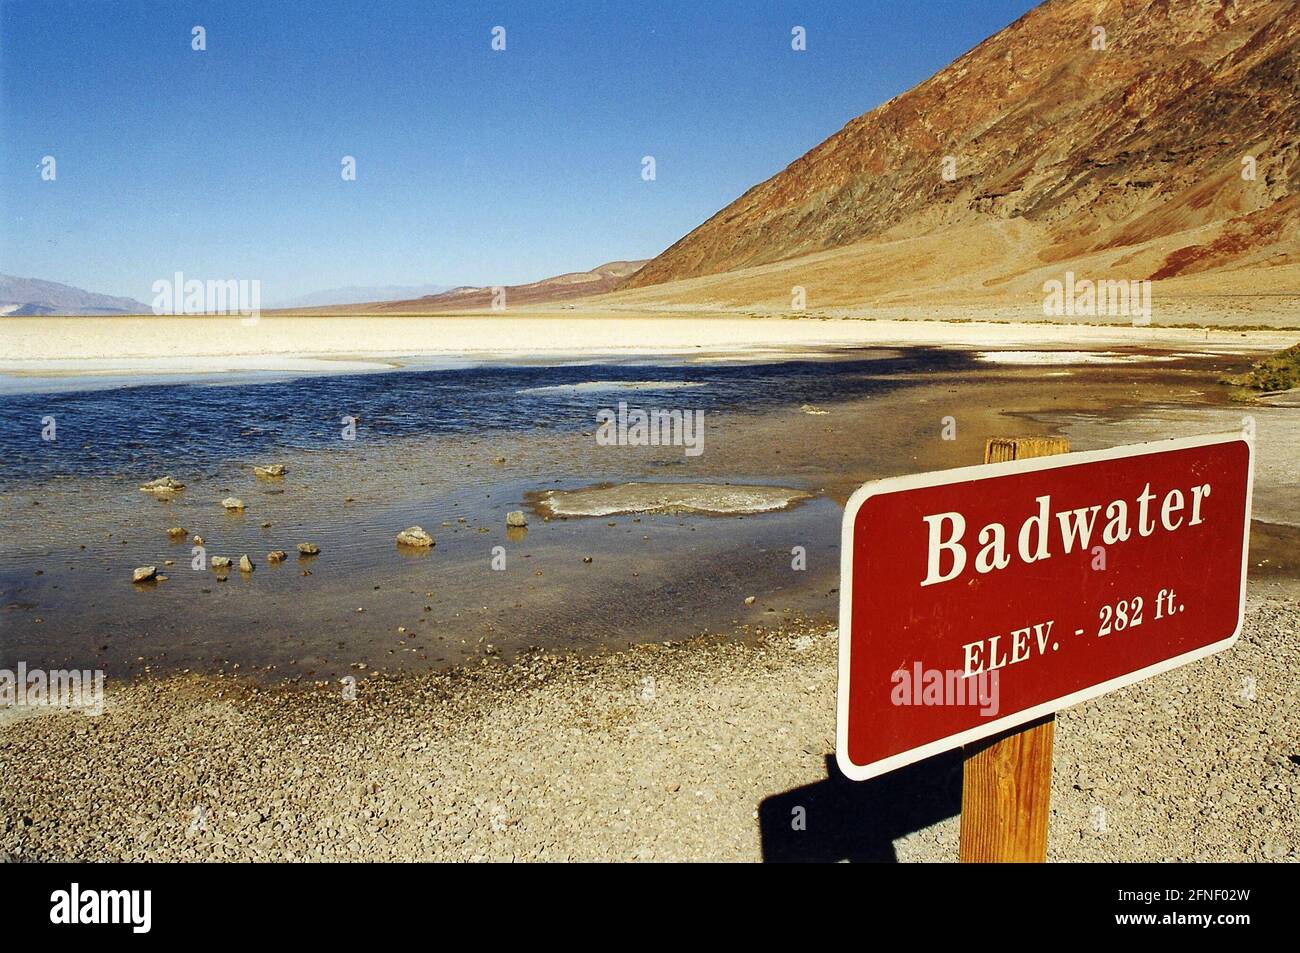 The salt lake Badwater in Death Valley, about 90 m below sea level (-282 ft.) and thus the lowest point on the American continent. [automated translation] Stock Photo